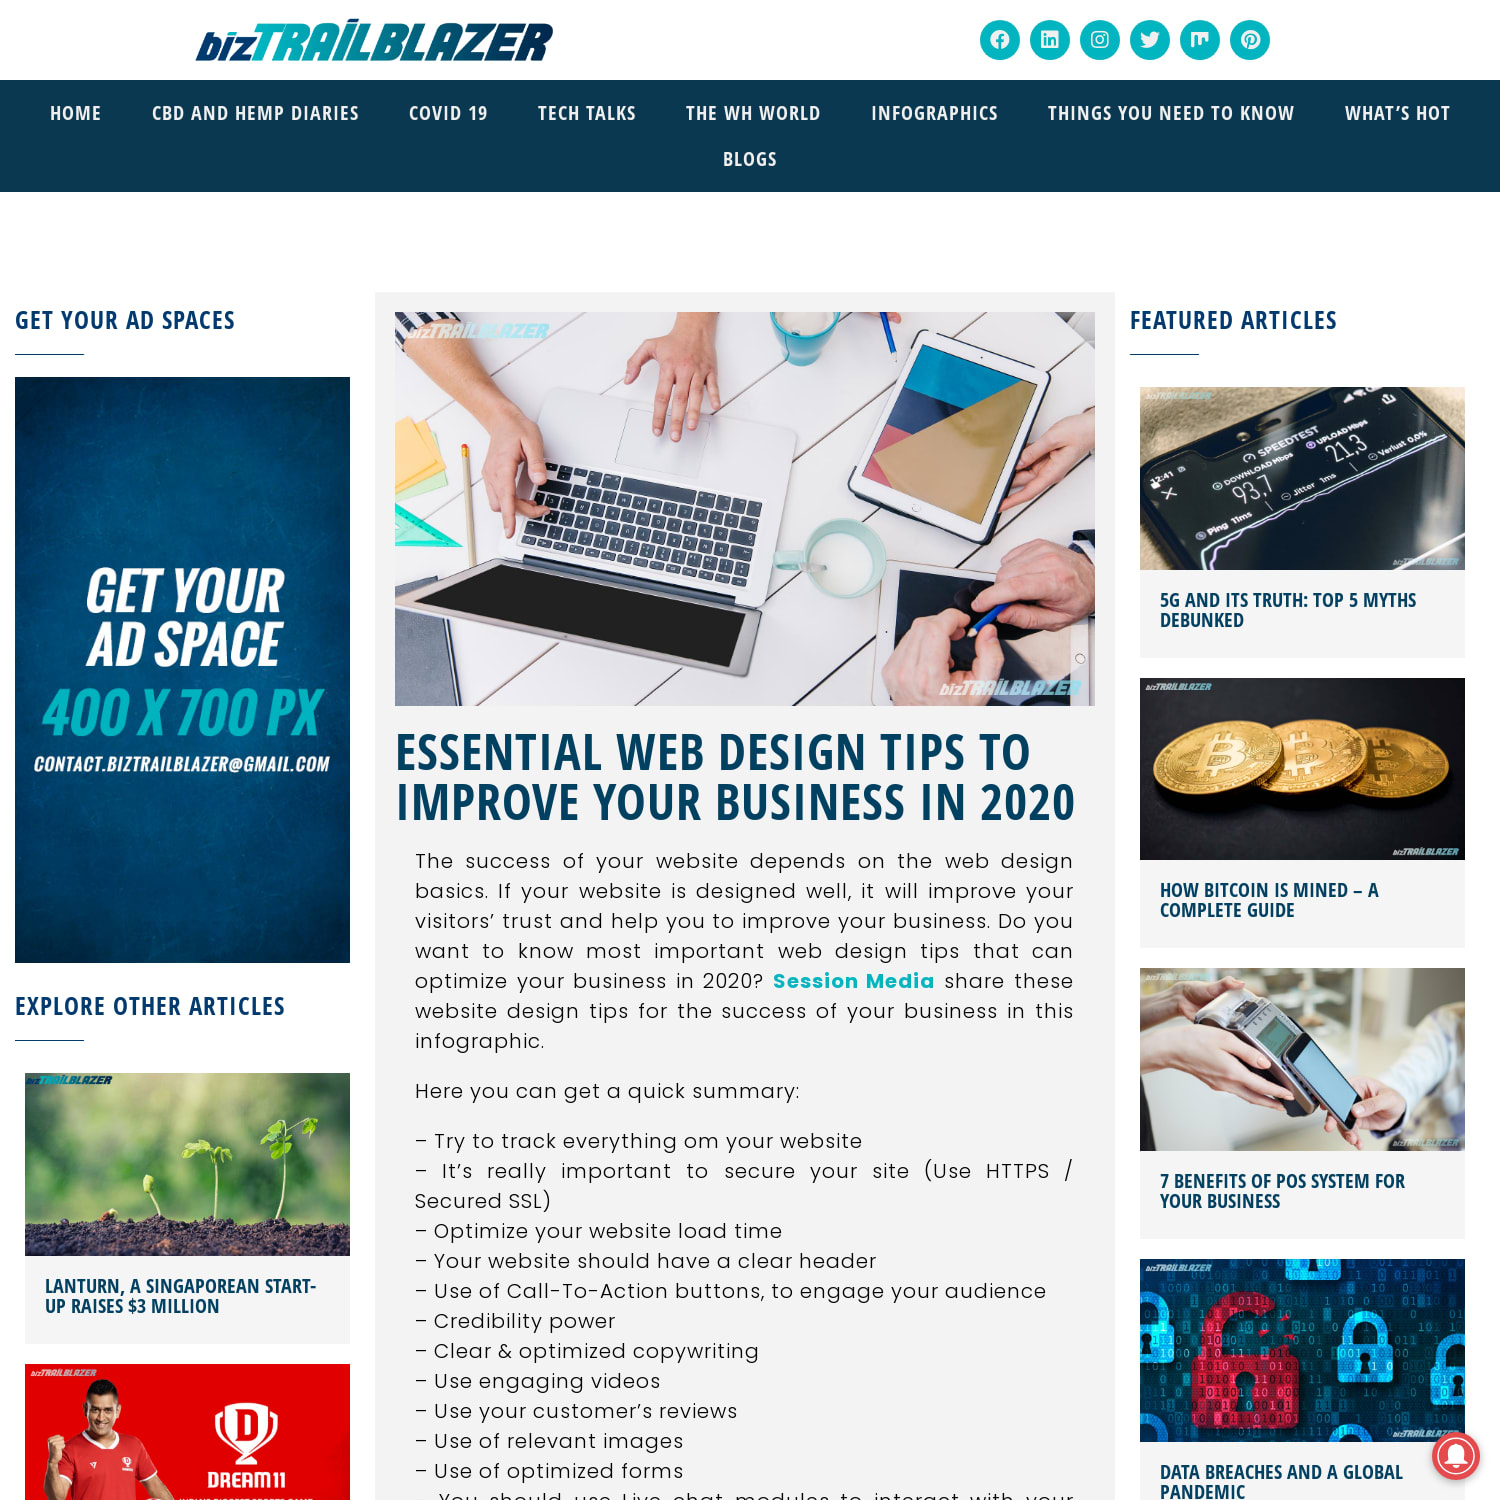 Essential Web Design Tips to Improve Your Business in 2020